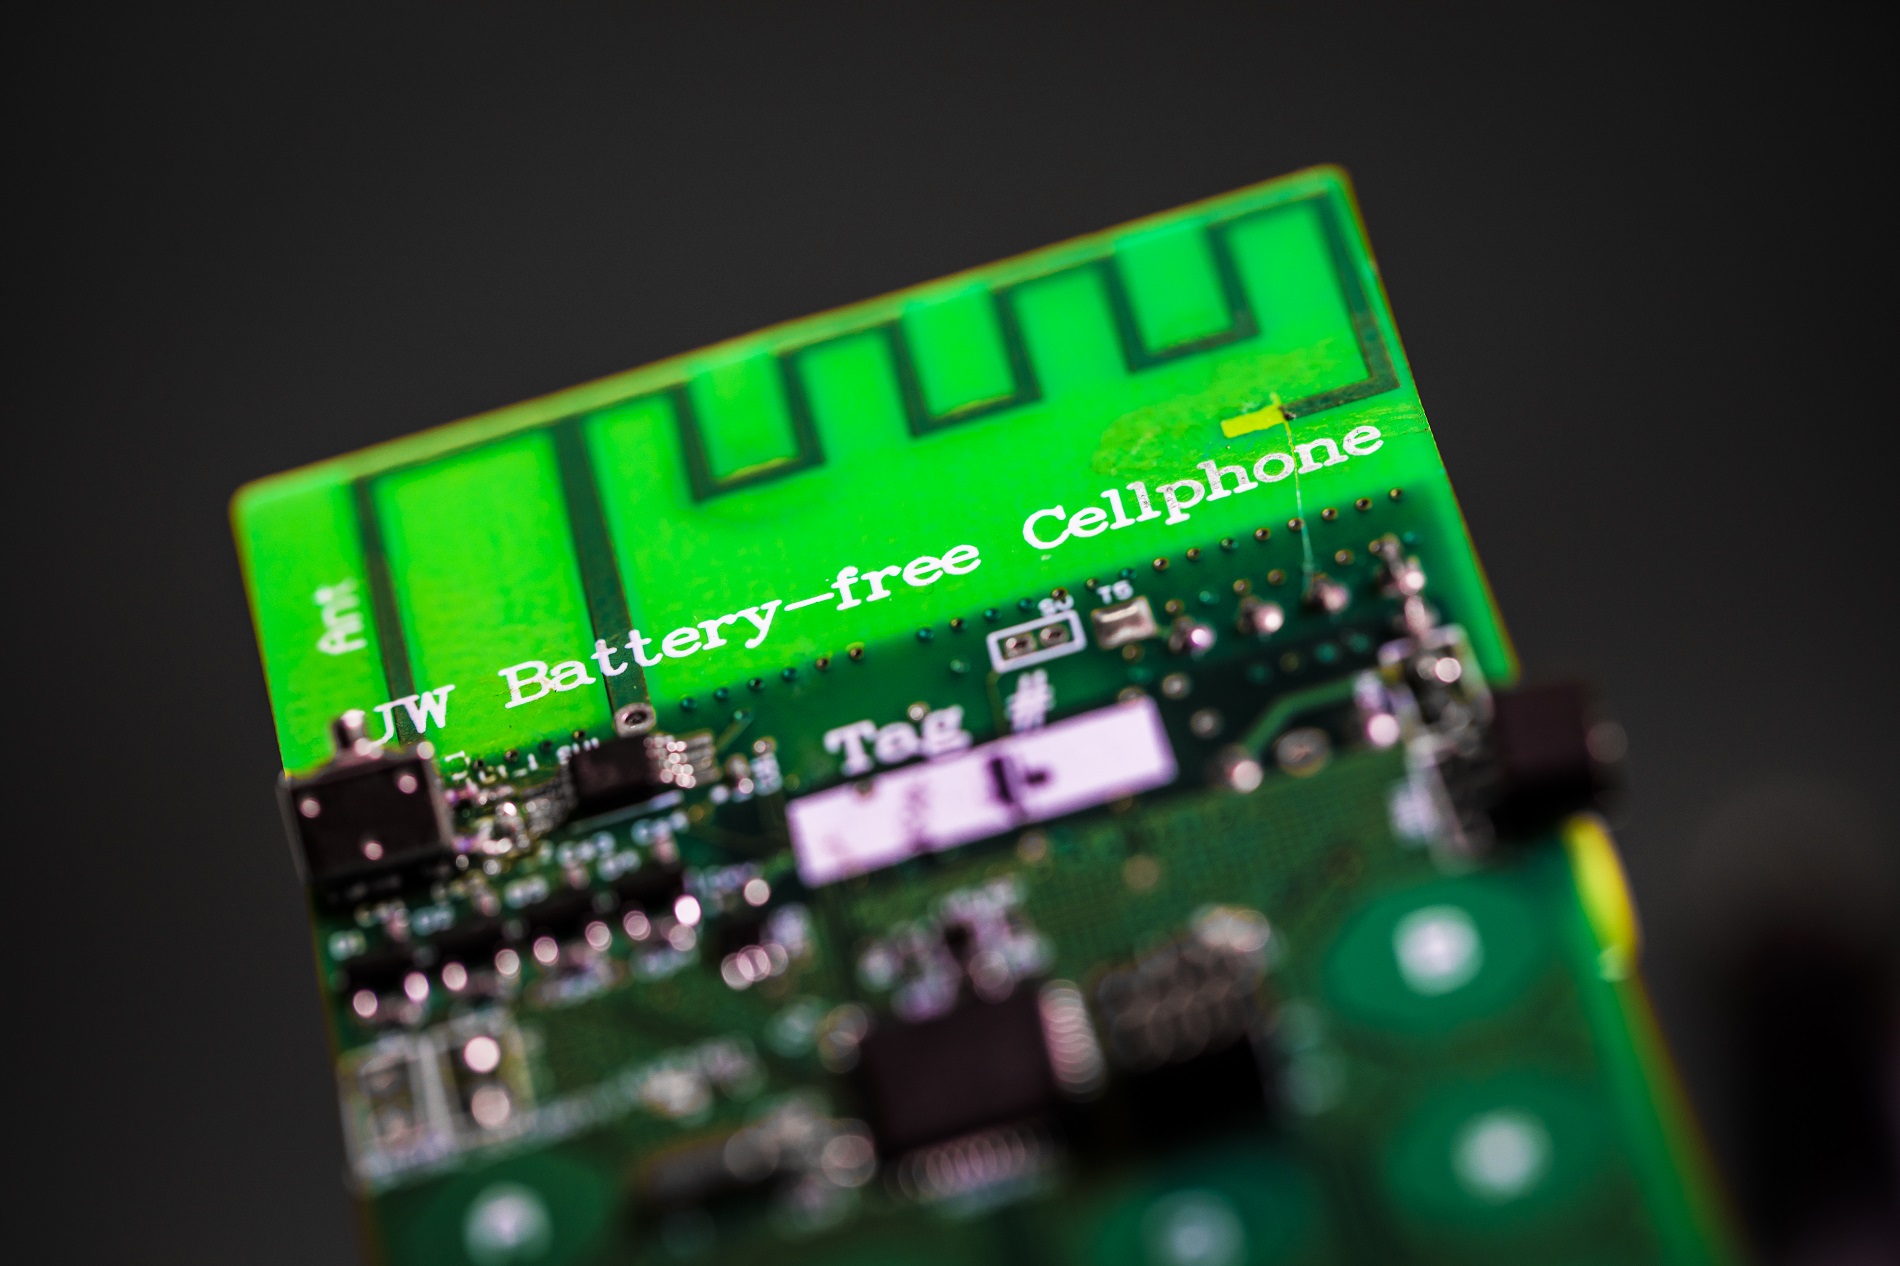 UW engineers have designed the first battery-free cellphone that can send and receive calls using only a few microwatts of power